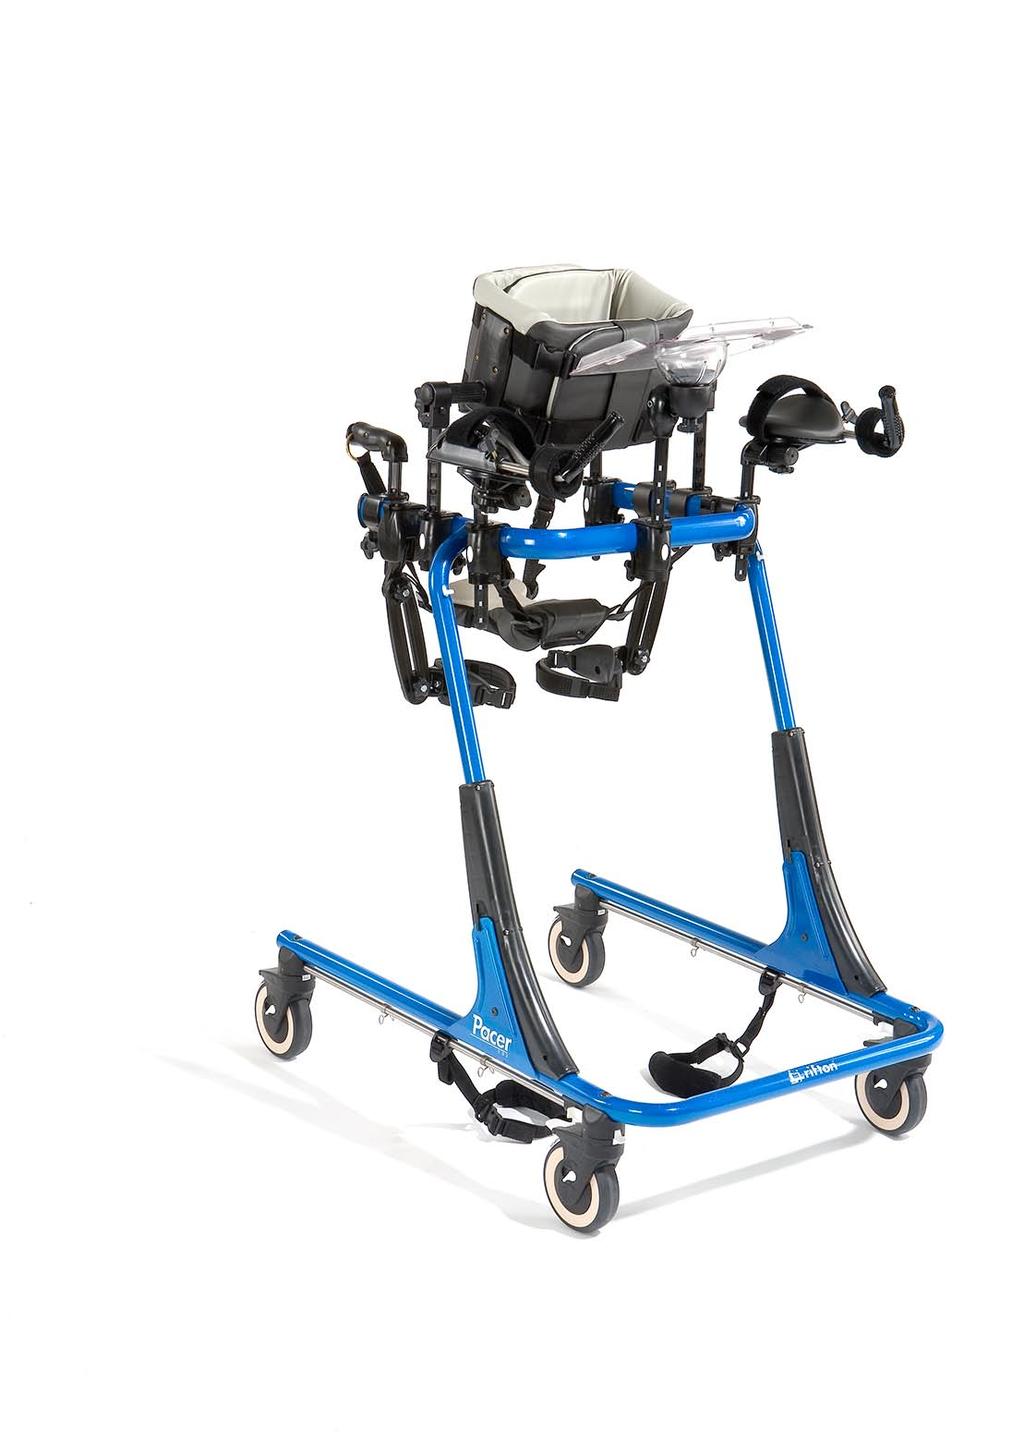 Rifton Pacer Gait Trainer Sample Letter of Medical Necessity EVERY REASONABLE EFFORT HAS BEEN MADE TO VERIFY THE ACCURACY OF THE INFORMATION.